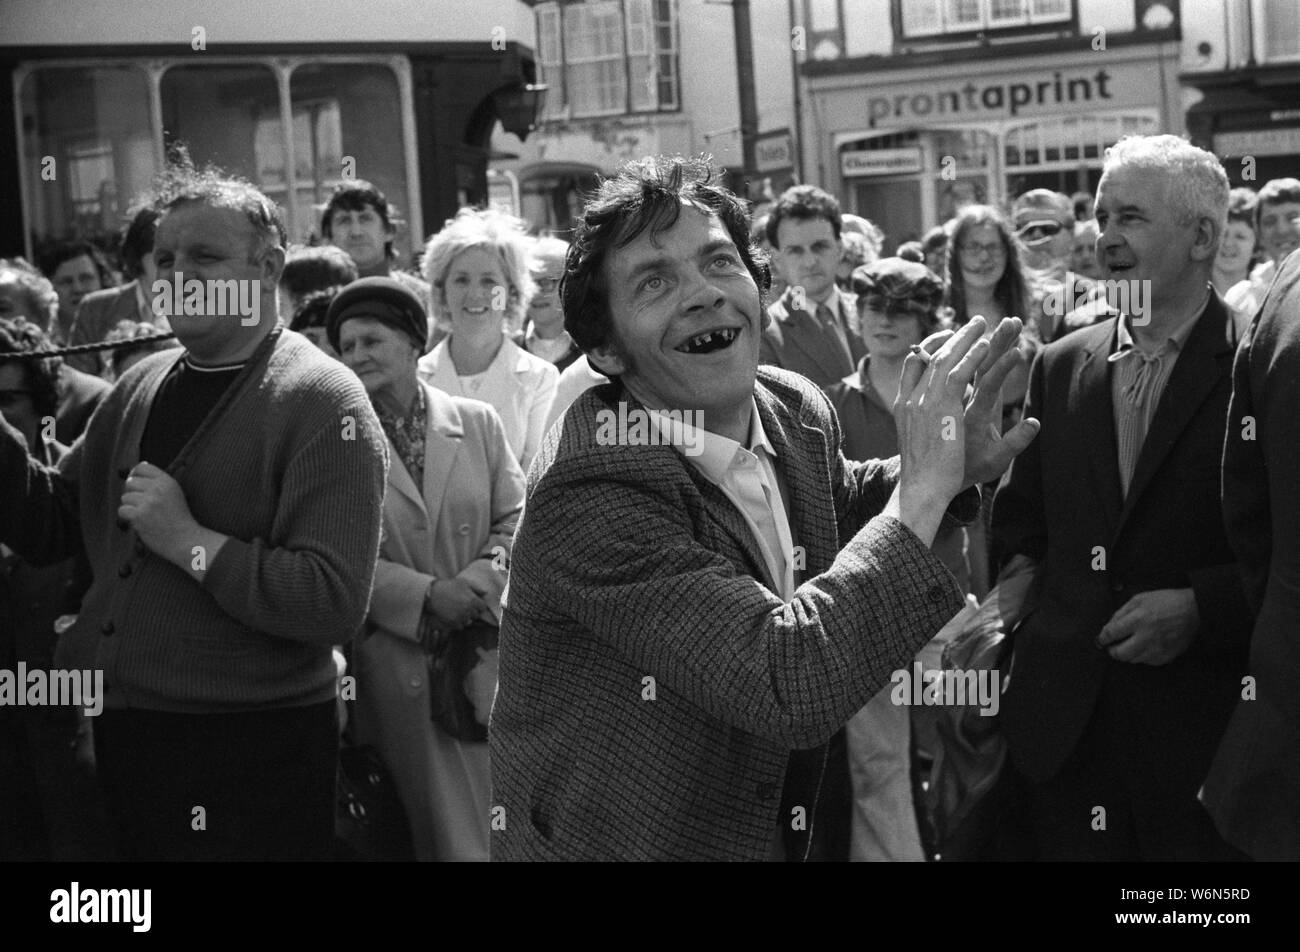 Gap tooth rotten teeth 1970s UK. Bad dental care smoker smoking cigarettes with cigarette in hand, smiling laughing a coal miner dances to the sound of a colliery silver bands, at the traditional annual Durham Miners Gala. County Durham, England 1974 HOMER SYKES Stock Photo